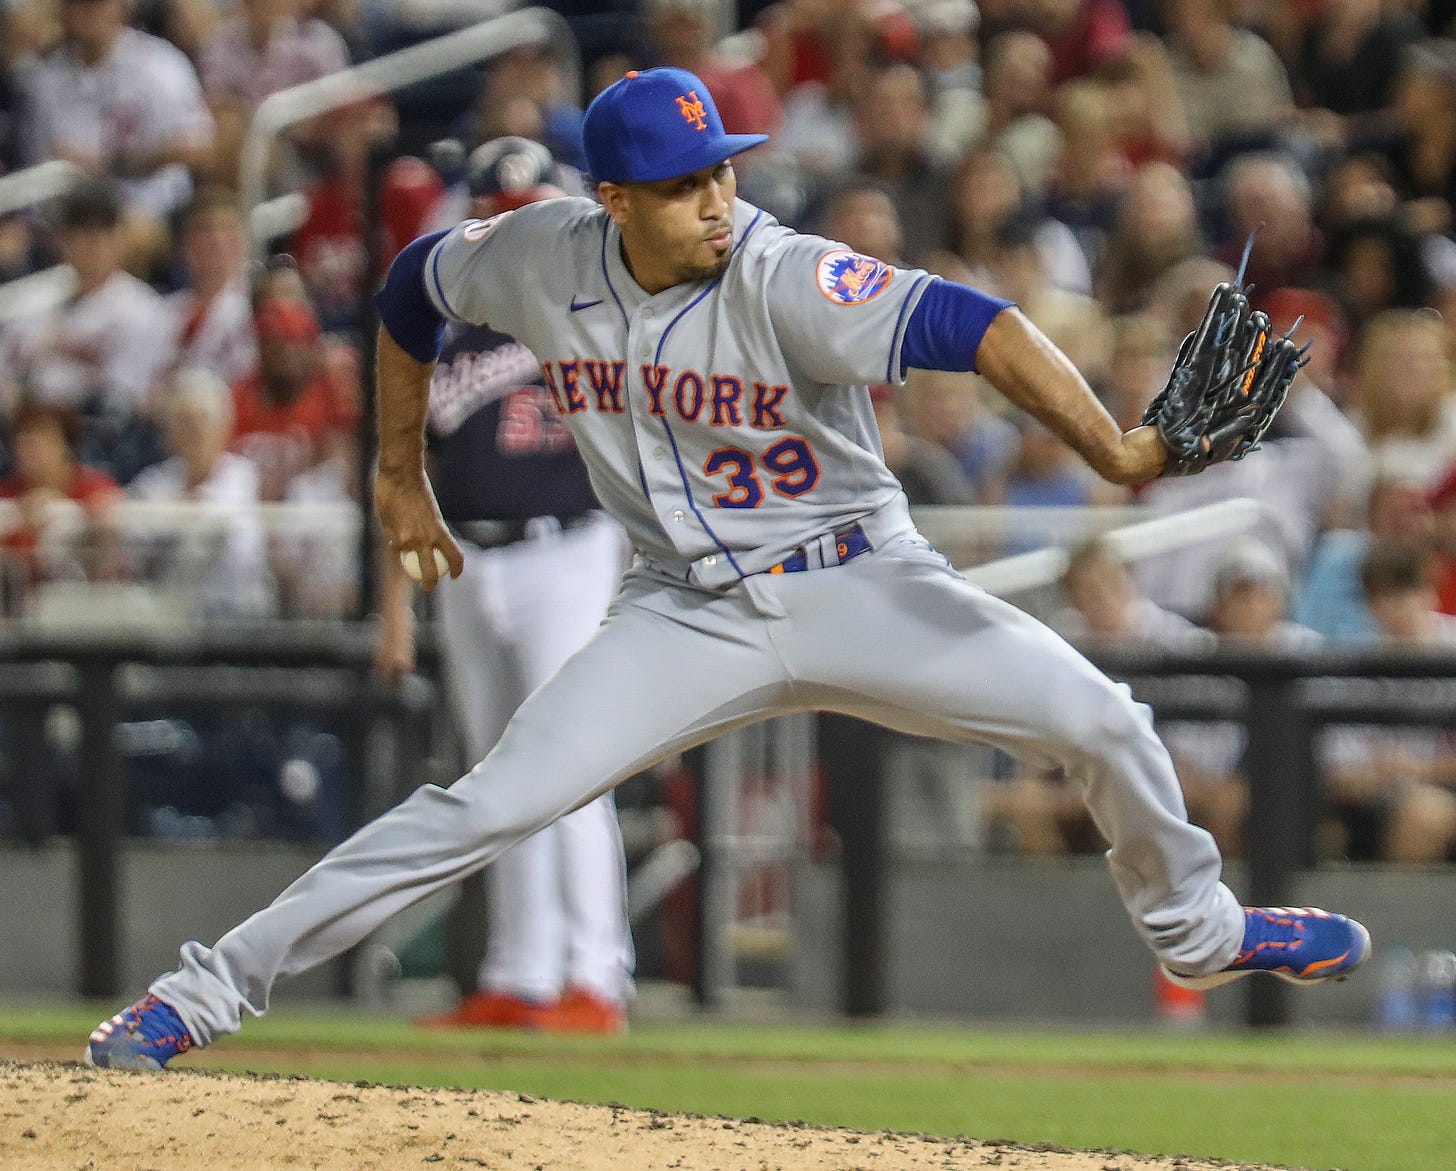 Mets closer Edwin Diaz throwing the cheese (51267940604) (cropped)